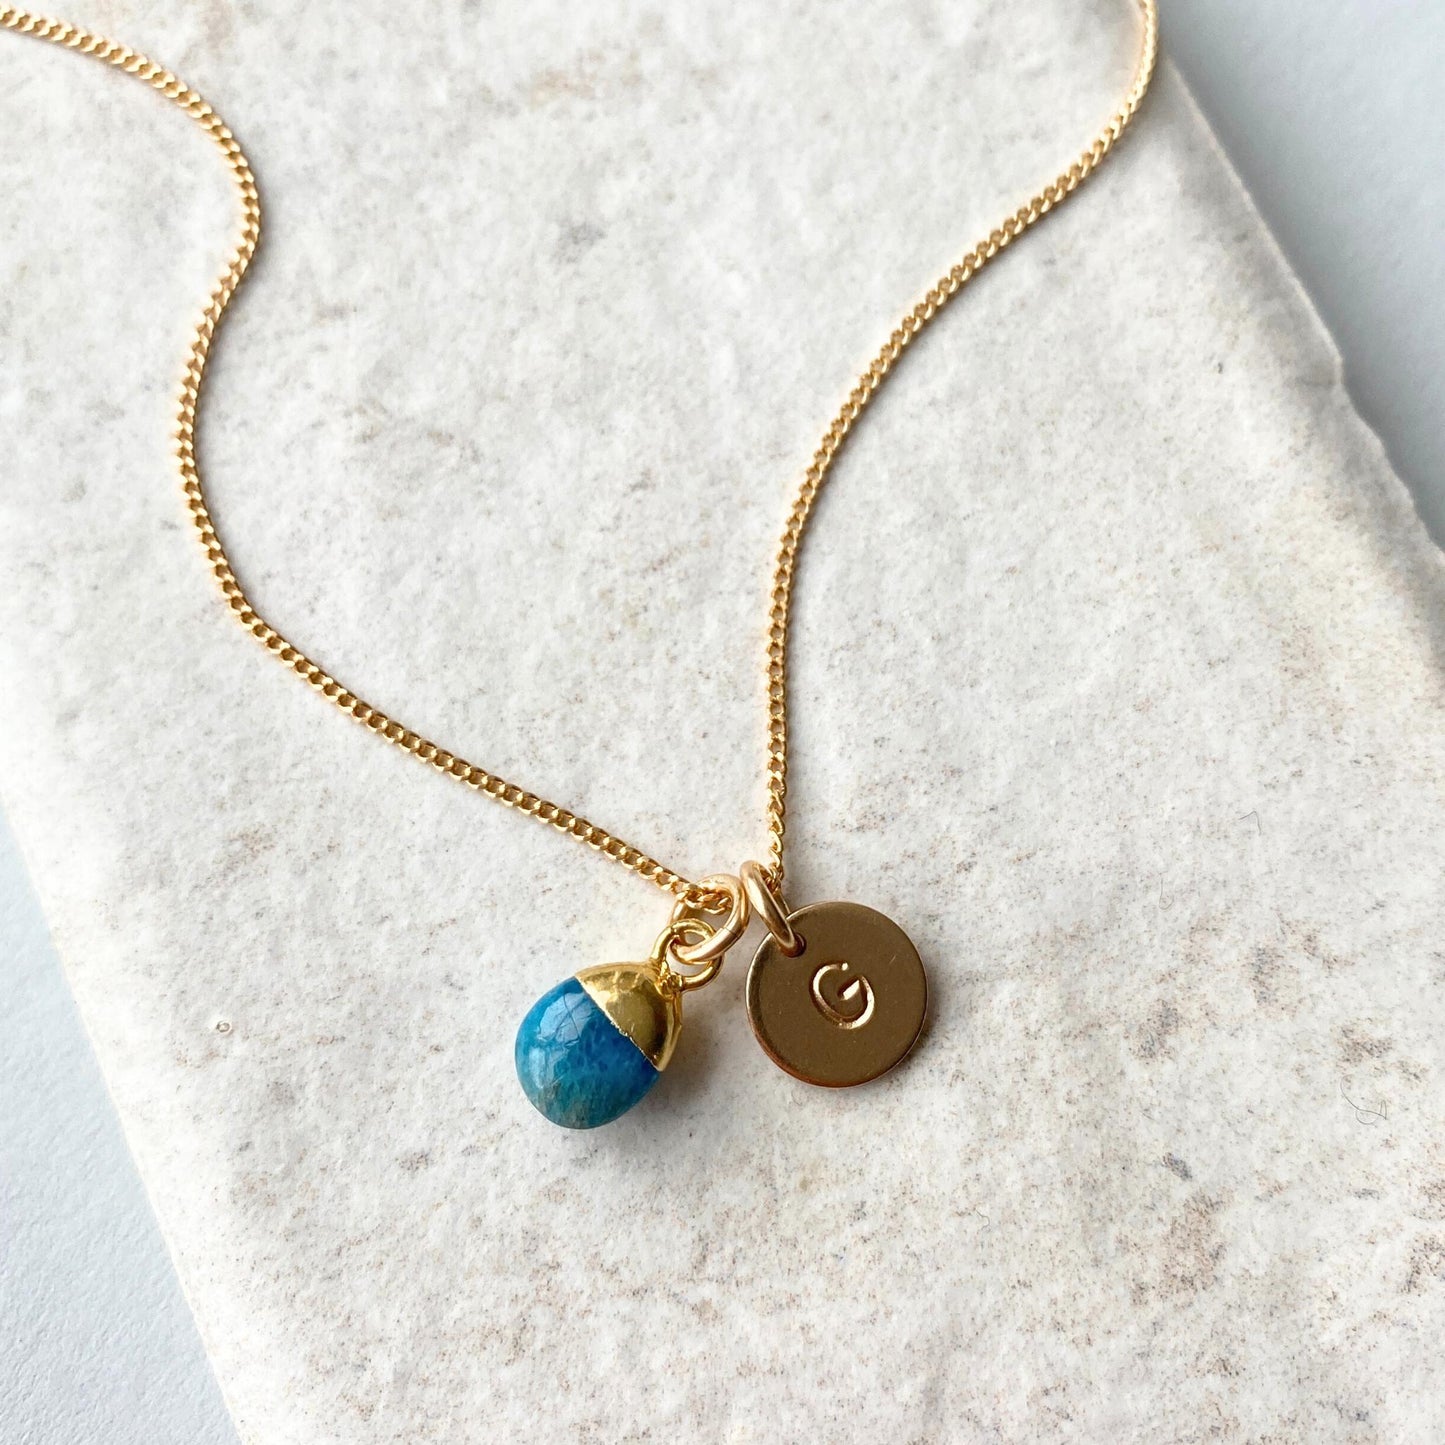 Neon Apatite Tiny Tumbled Necklace | Dream (Gold Plated)